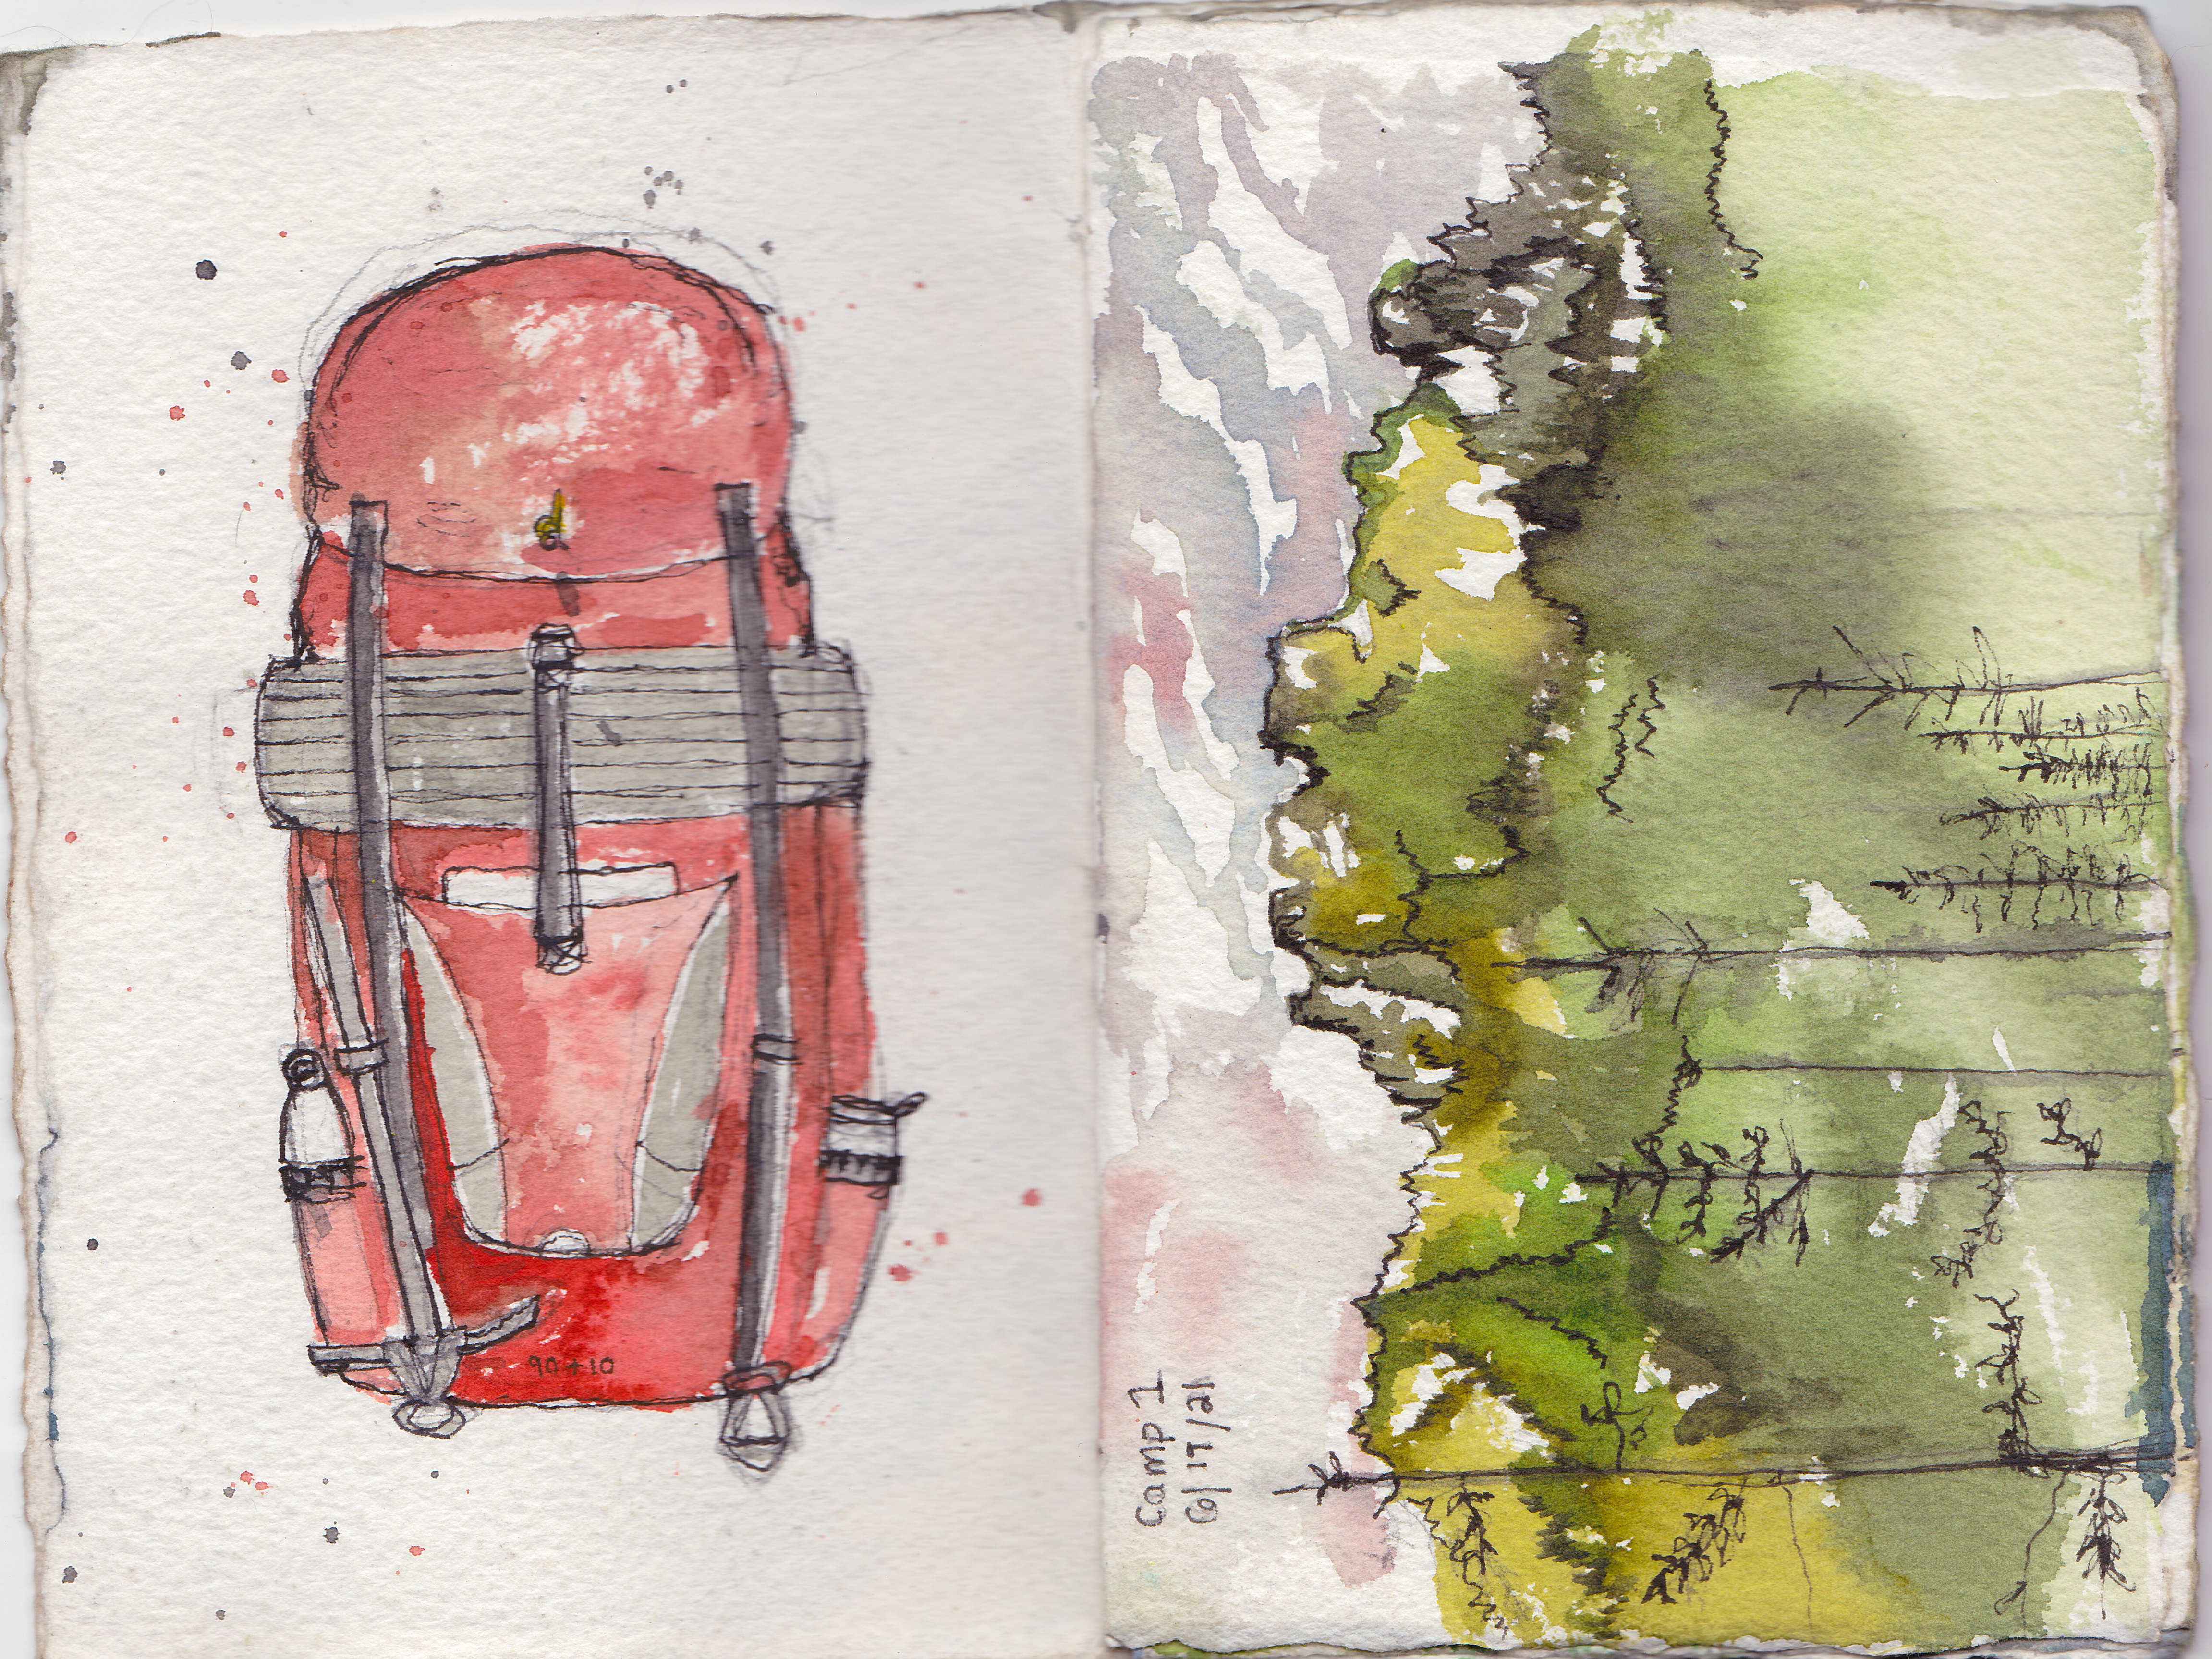 Watercolor painting of a red backpack and a scene of green trees in a mountain setting